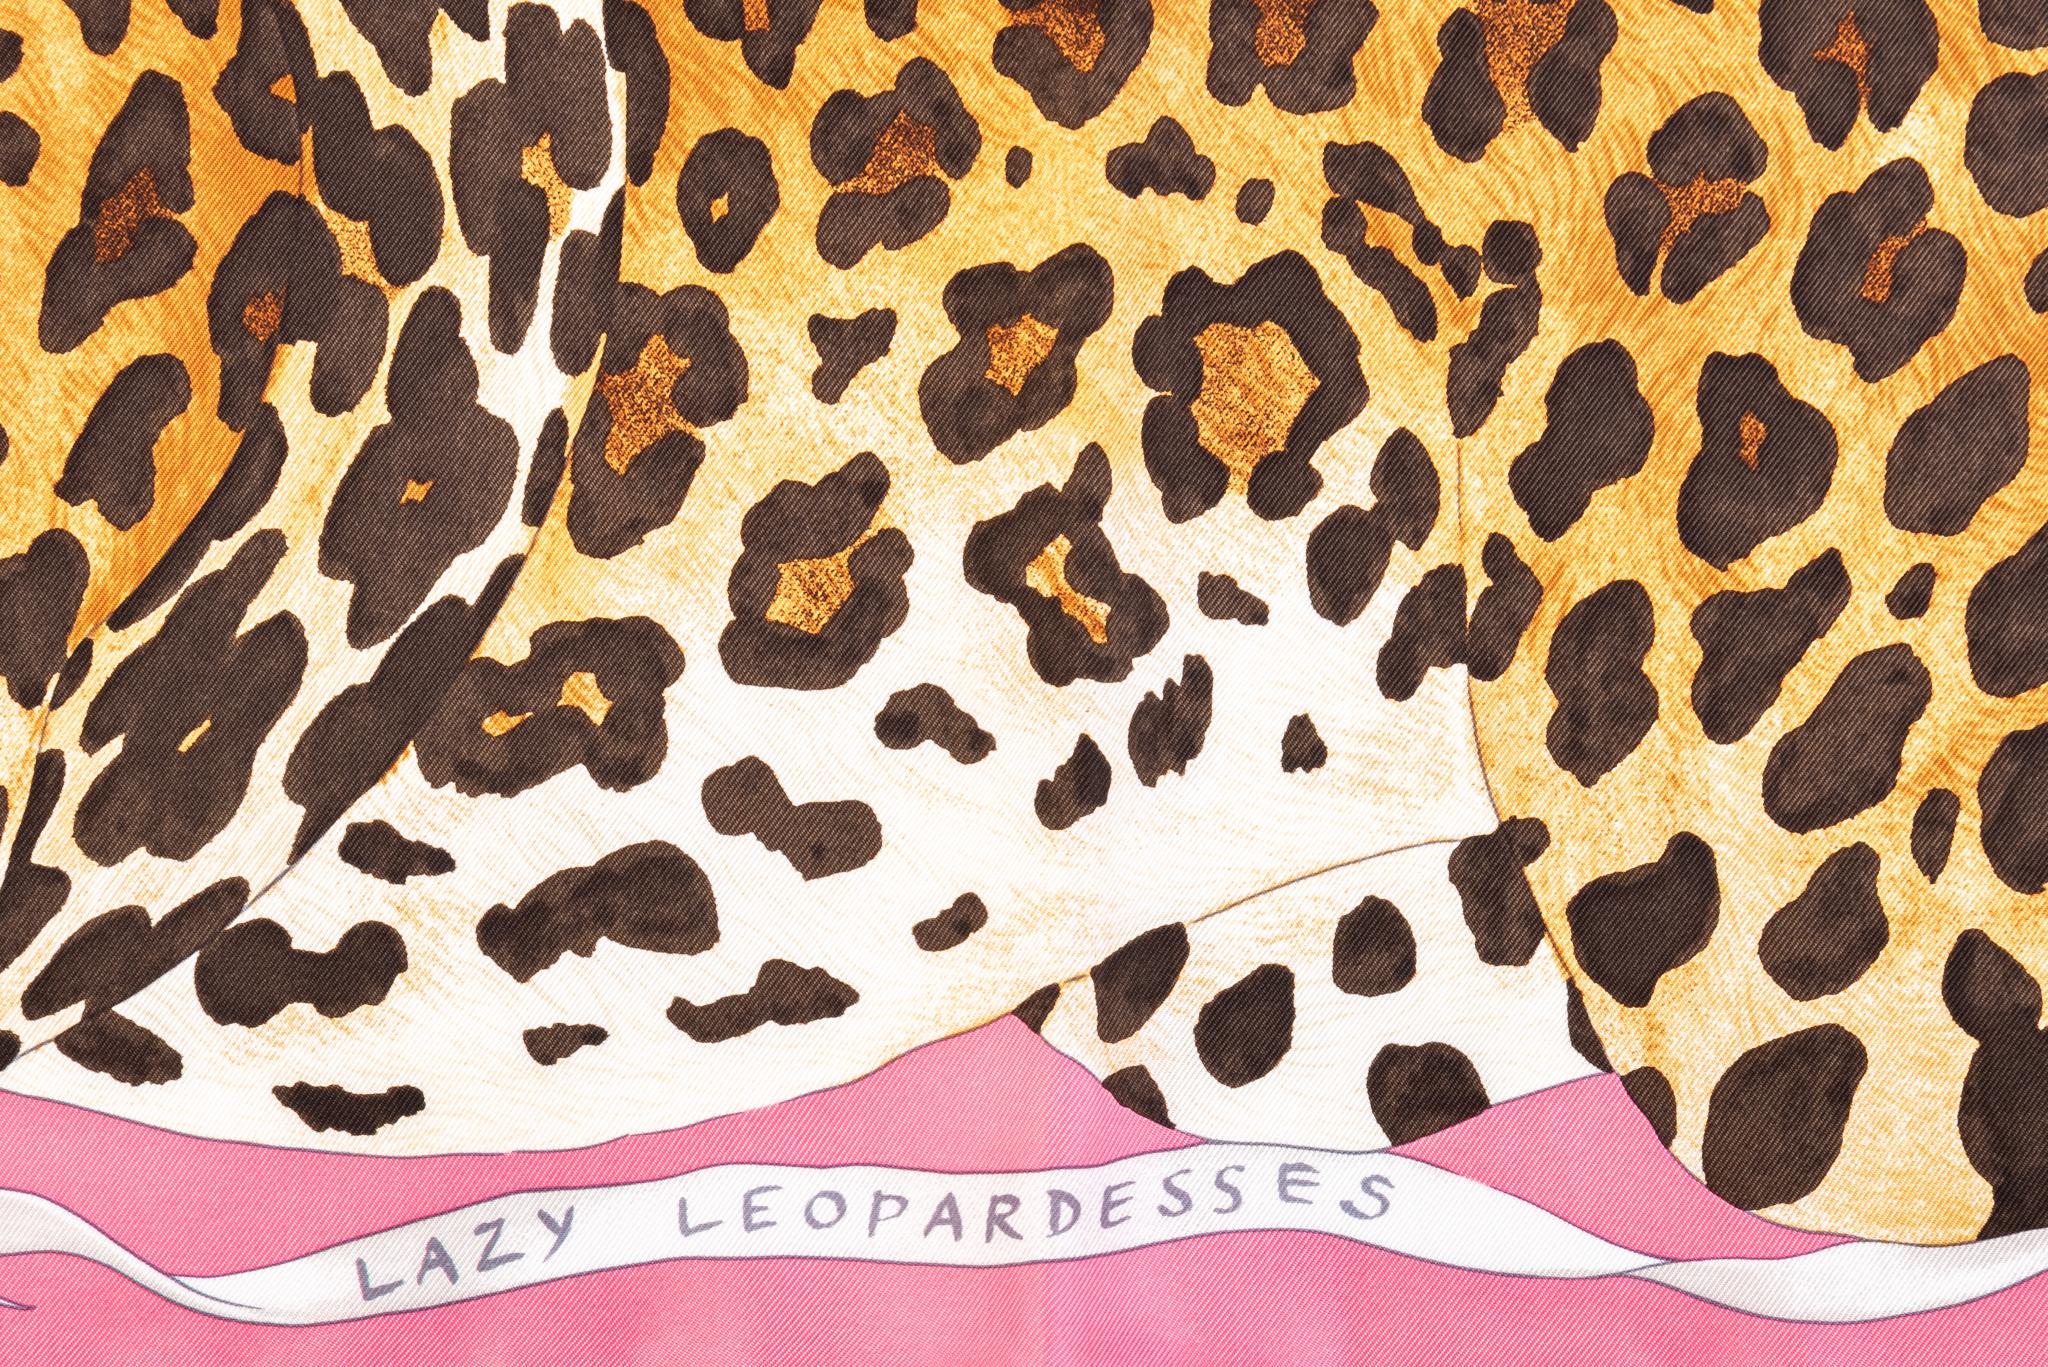 Hermès New Lazy Leopardess Silk Scarf In New Condition For Sale In West Hollywood, CA